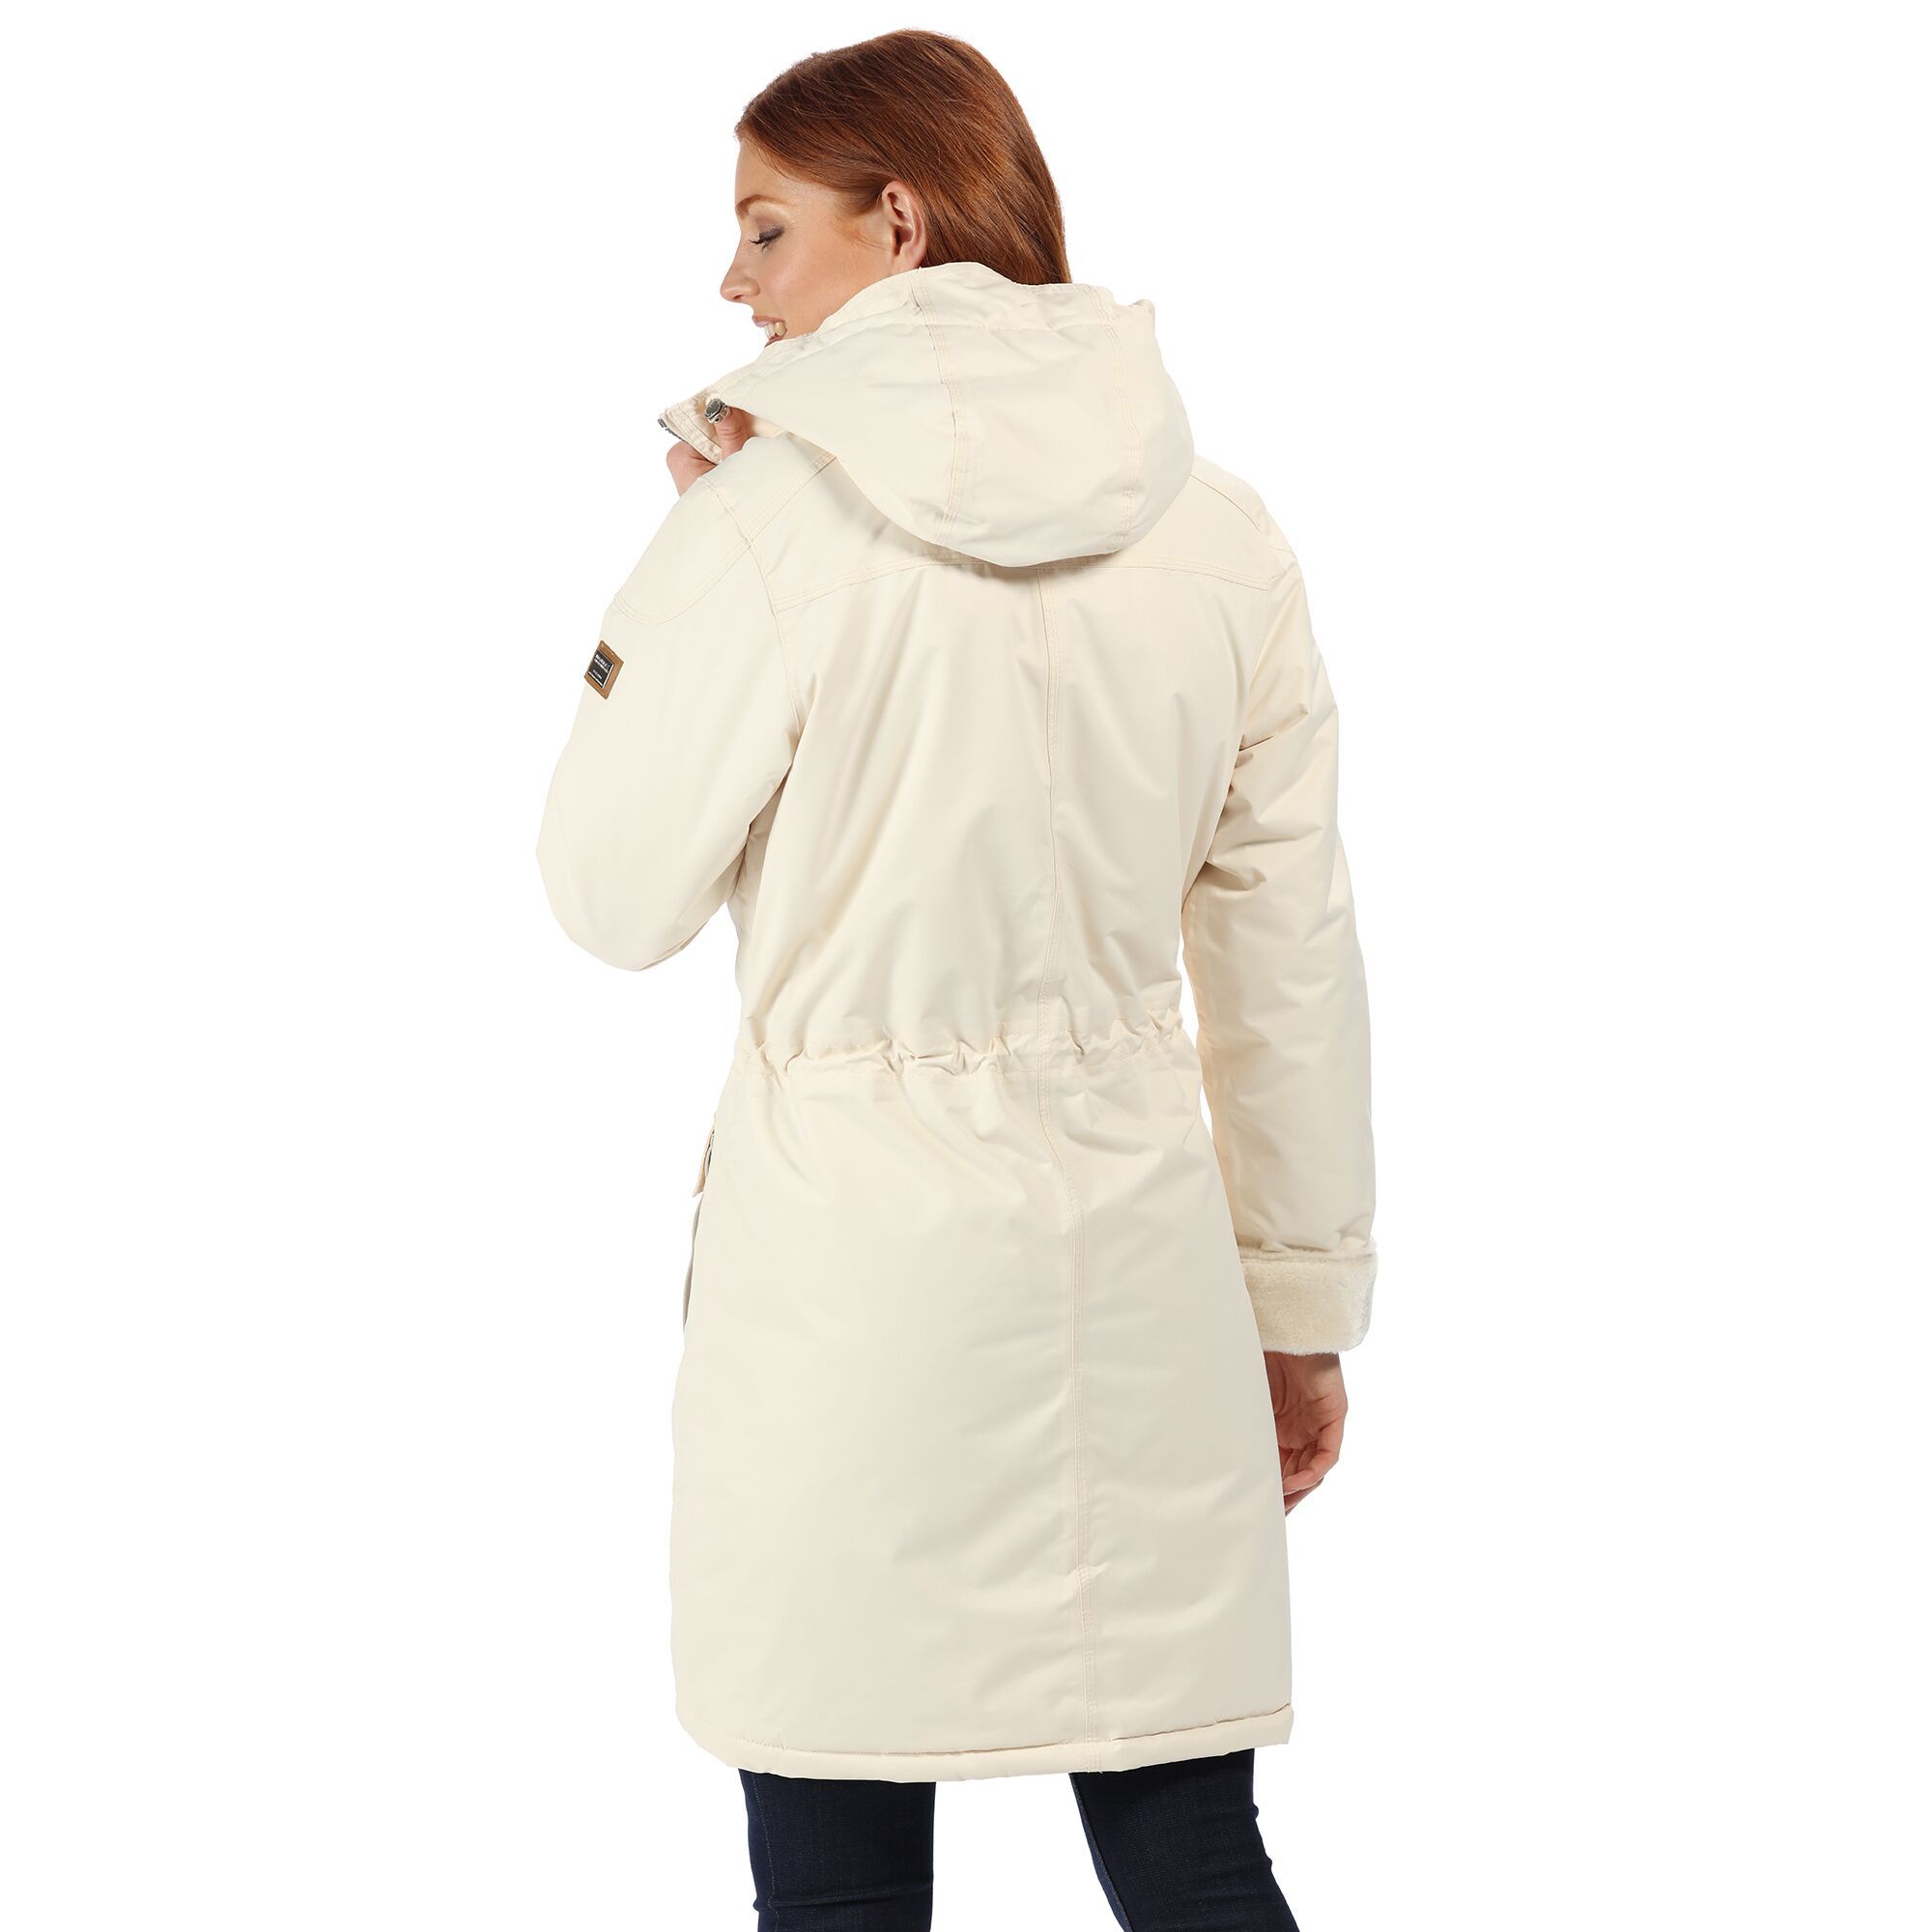 Womens full length hooded jacket made of Polyester Isotex 5000 coated taslan fabric. Waterproof and breathable. Taped seams. Durable water repellent finish. Thermo-Guard insulation. Internal security pocket. Luxurious faux fur lining to hood, cuffs, and facings. Polyester taffeta lining to the body. Grown on hood with shockcord adjustment system. 2 way centre front zip. 2 lower pockets with handwarmers to side. Ideal for wearing outdoors on a cold day. 100% Polyester.